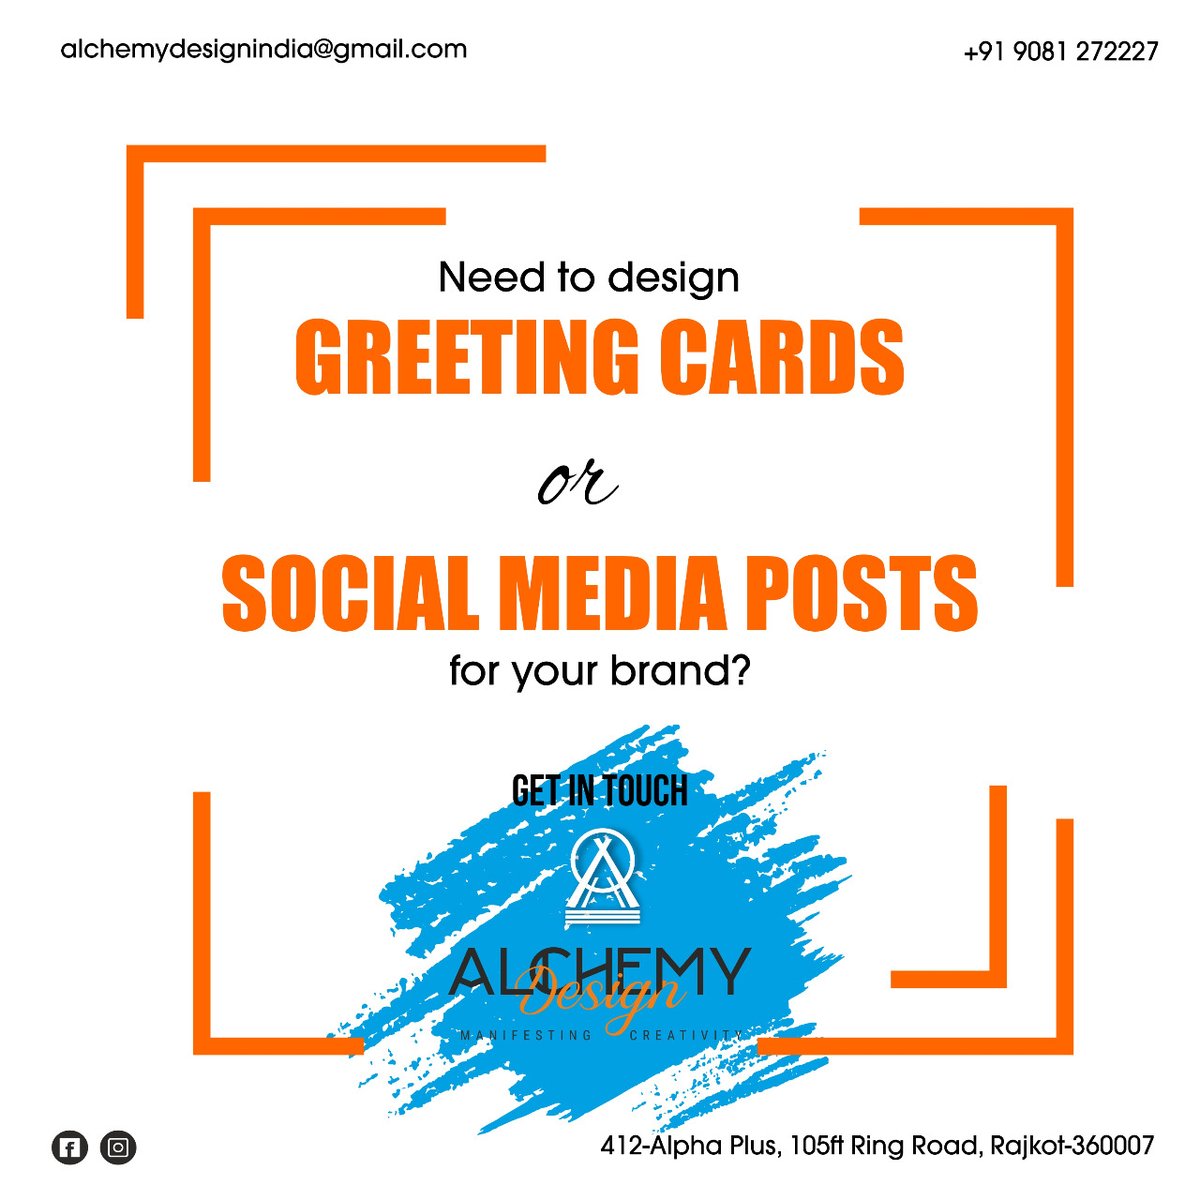 Get in touch with @alchemydesignindia for designing your Social Media Posts for any type of Greetings!
@alchemydesignindia
#greetingsdesign #greetingcardsdesigner #socialmediamarketing #logodesigner #graphicdesigner #creativity #startupbusiness #hustle #postsdesign